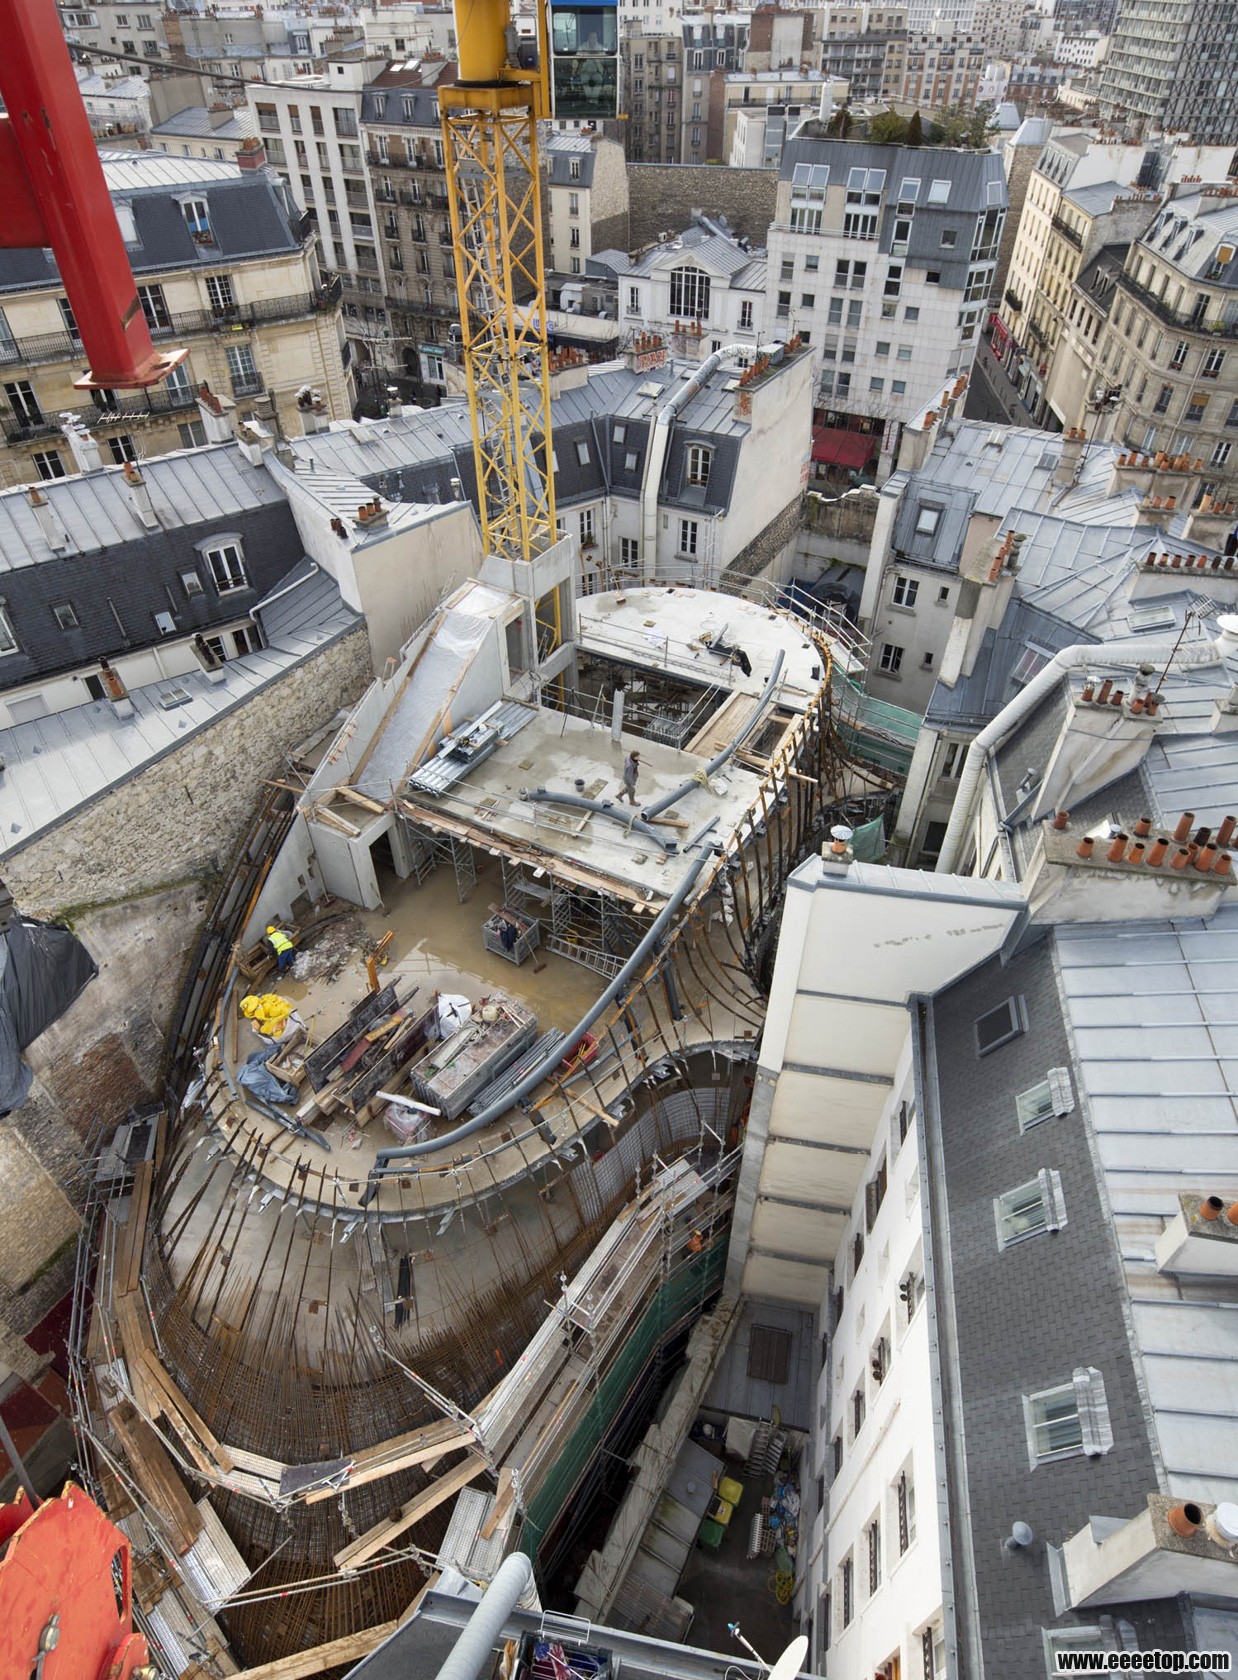 Eؽ_Pathe-Foundation-installation-in-Paris-by-Renzo-Piano_12.jpg